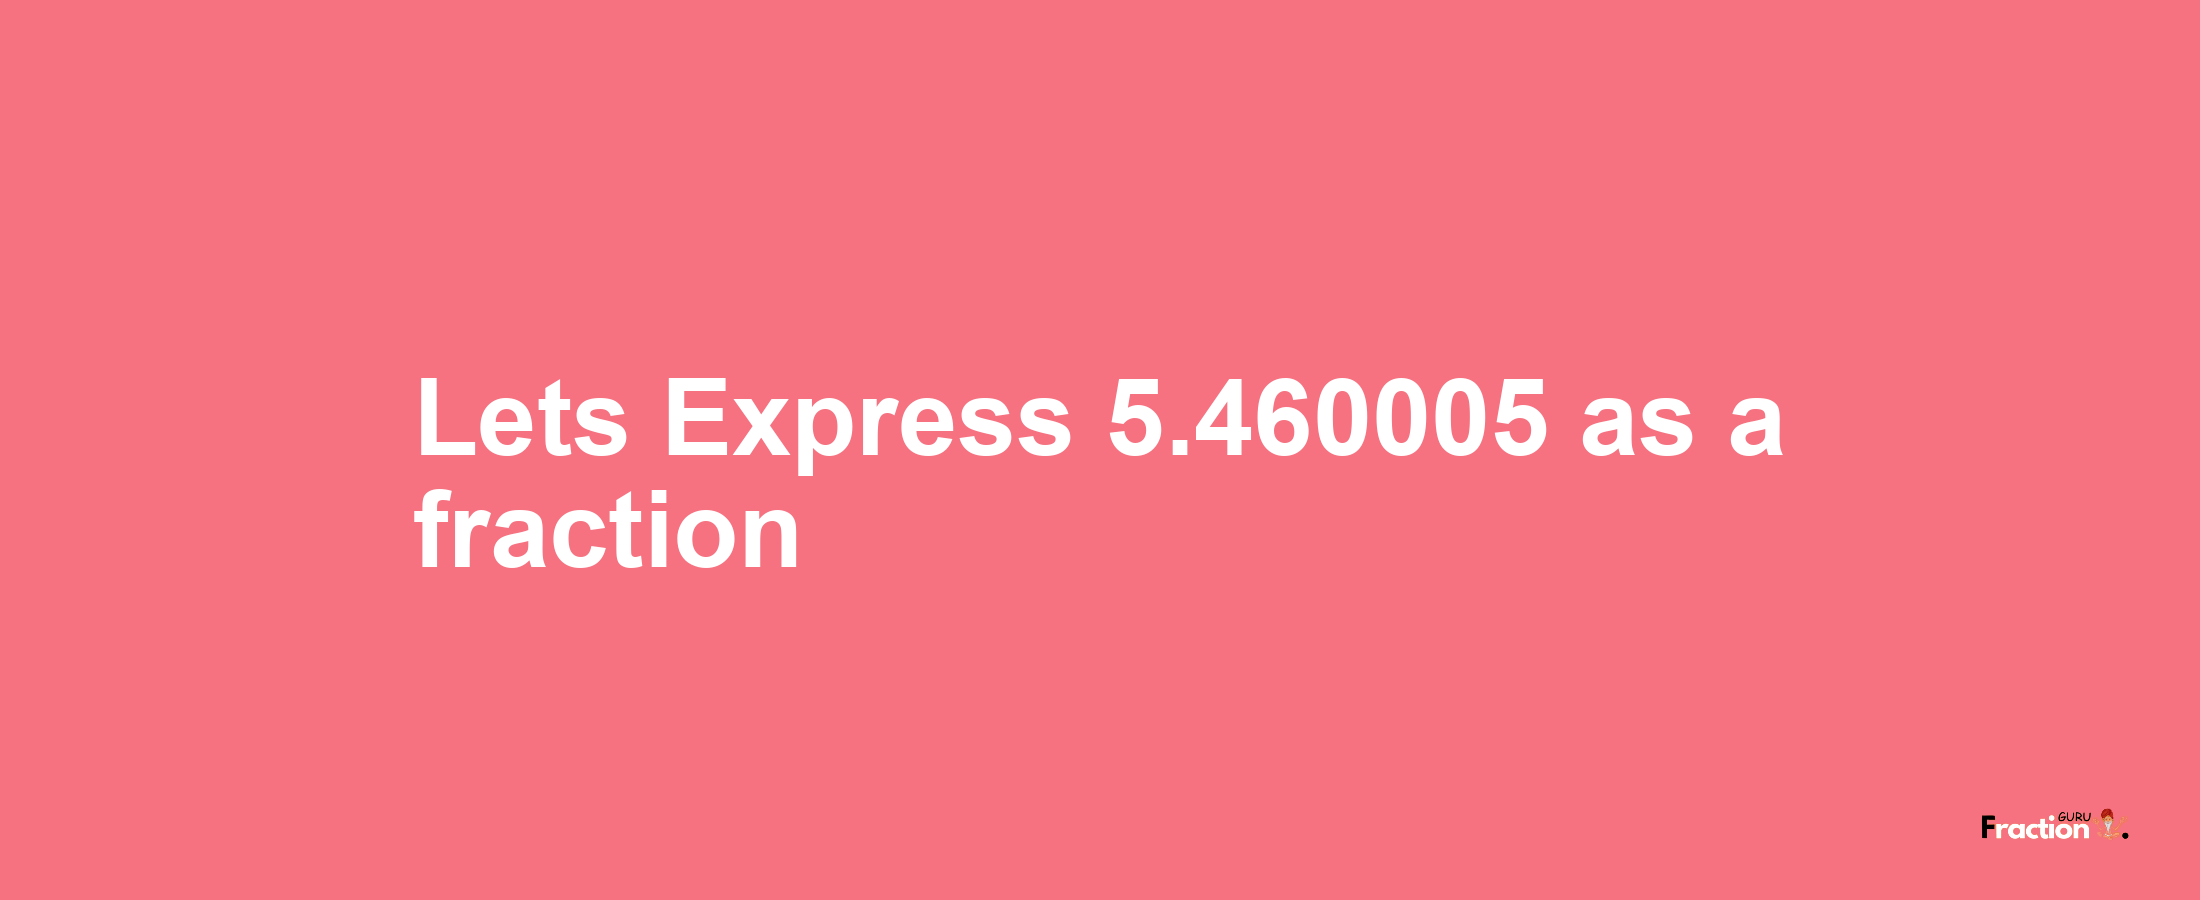 Lets Express 5.460005 as afraction